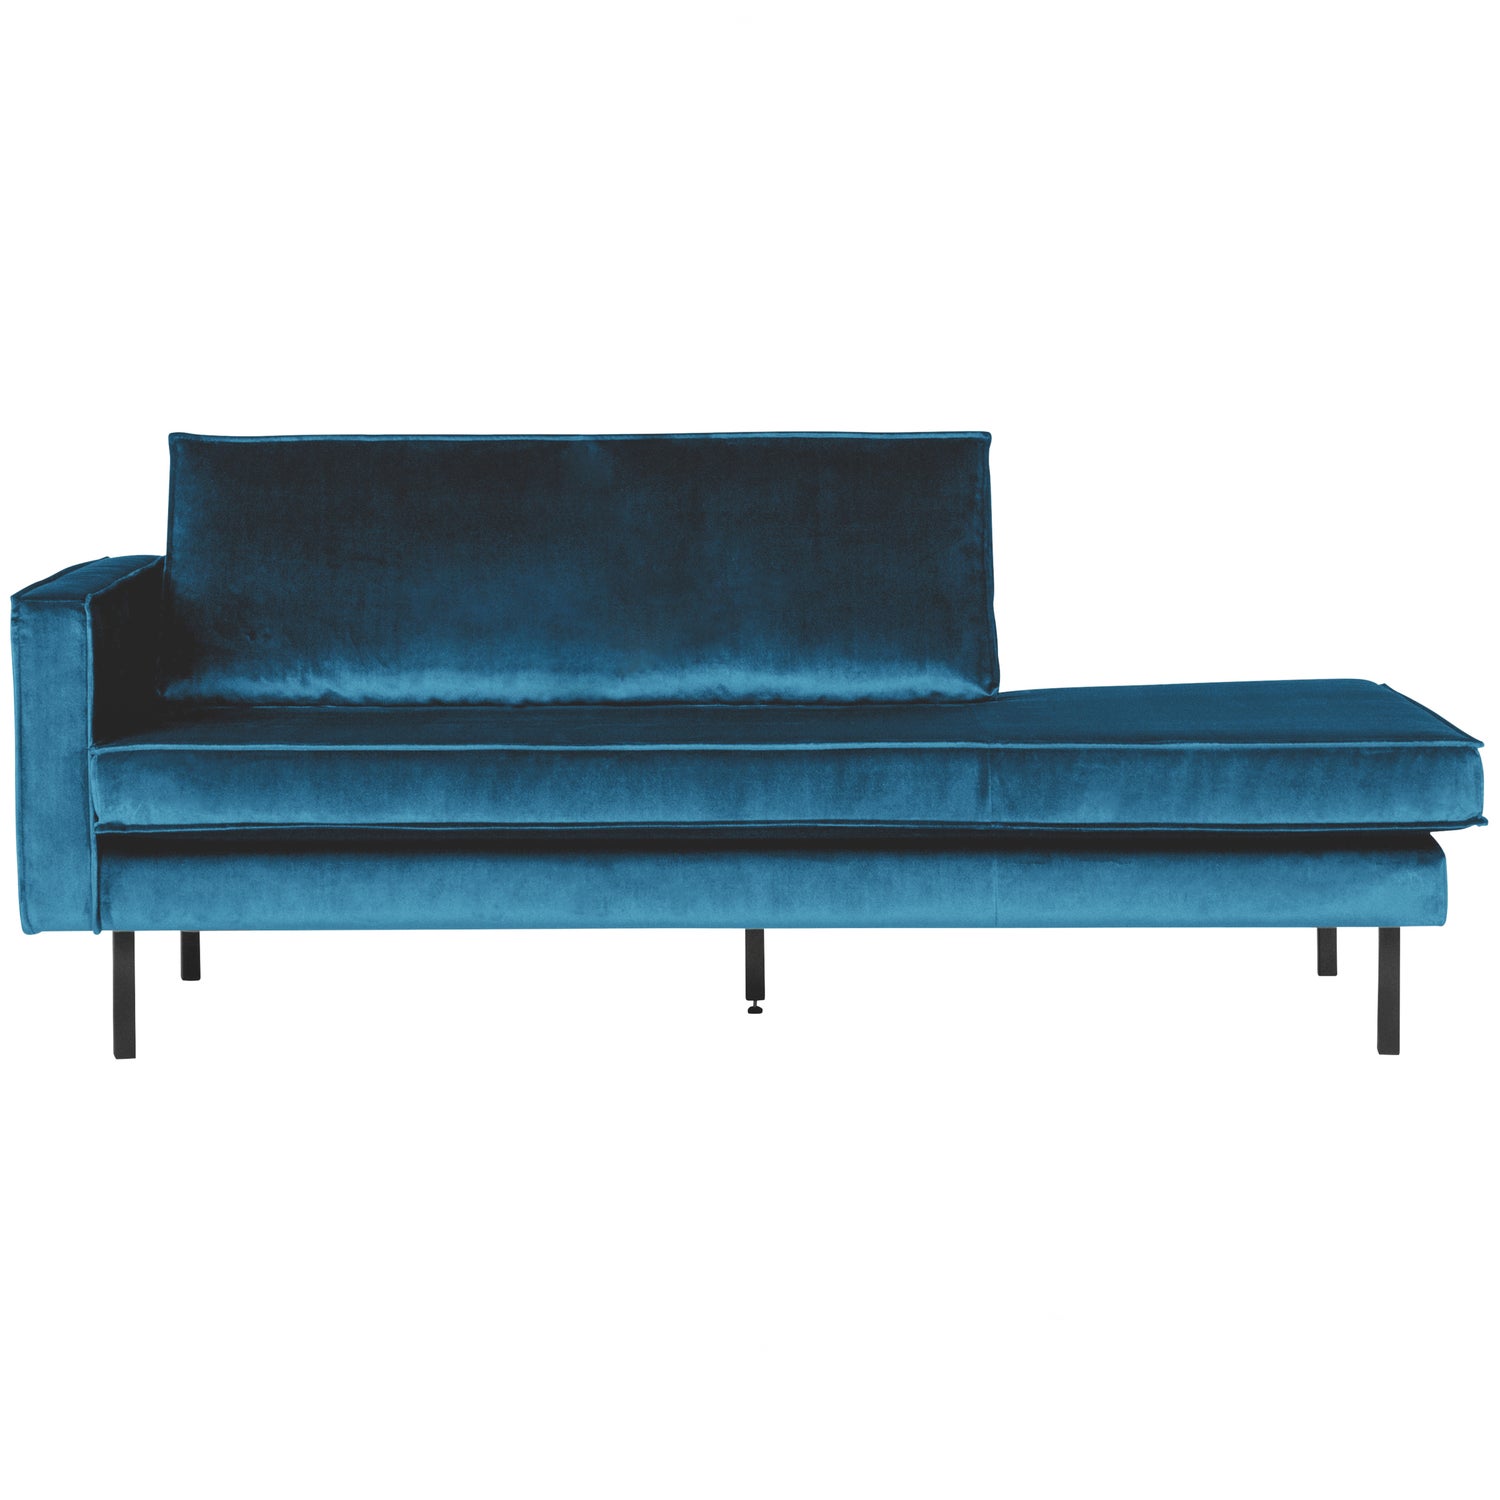 800743-45-01_VS_BP_Rodeo_daybed_left_blue_EA.jpg?auto=webp&format=png&width=1500&height=1500